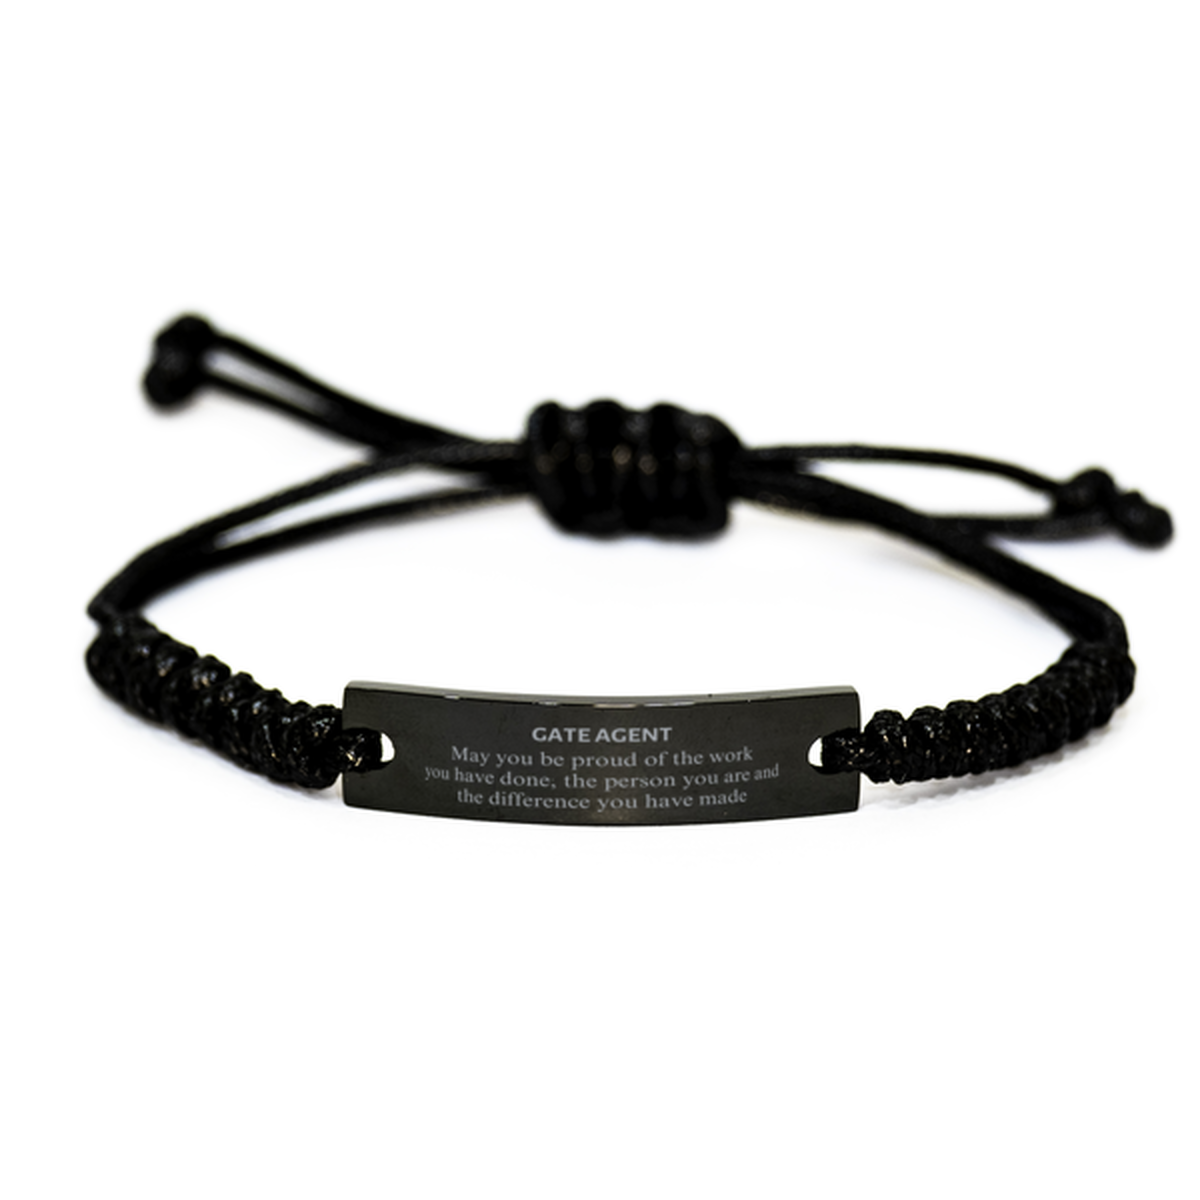 Gate Agent May you be proud of the work you have done, Retirement Gate Agent Black Rope Bracelet for Colleague Appreciation Gifts Amazing for Gate Agent